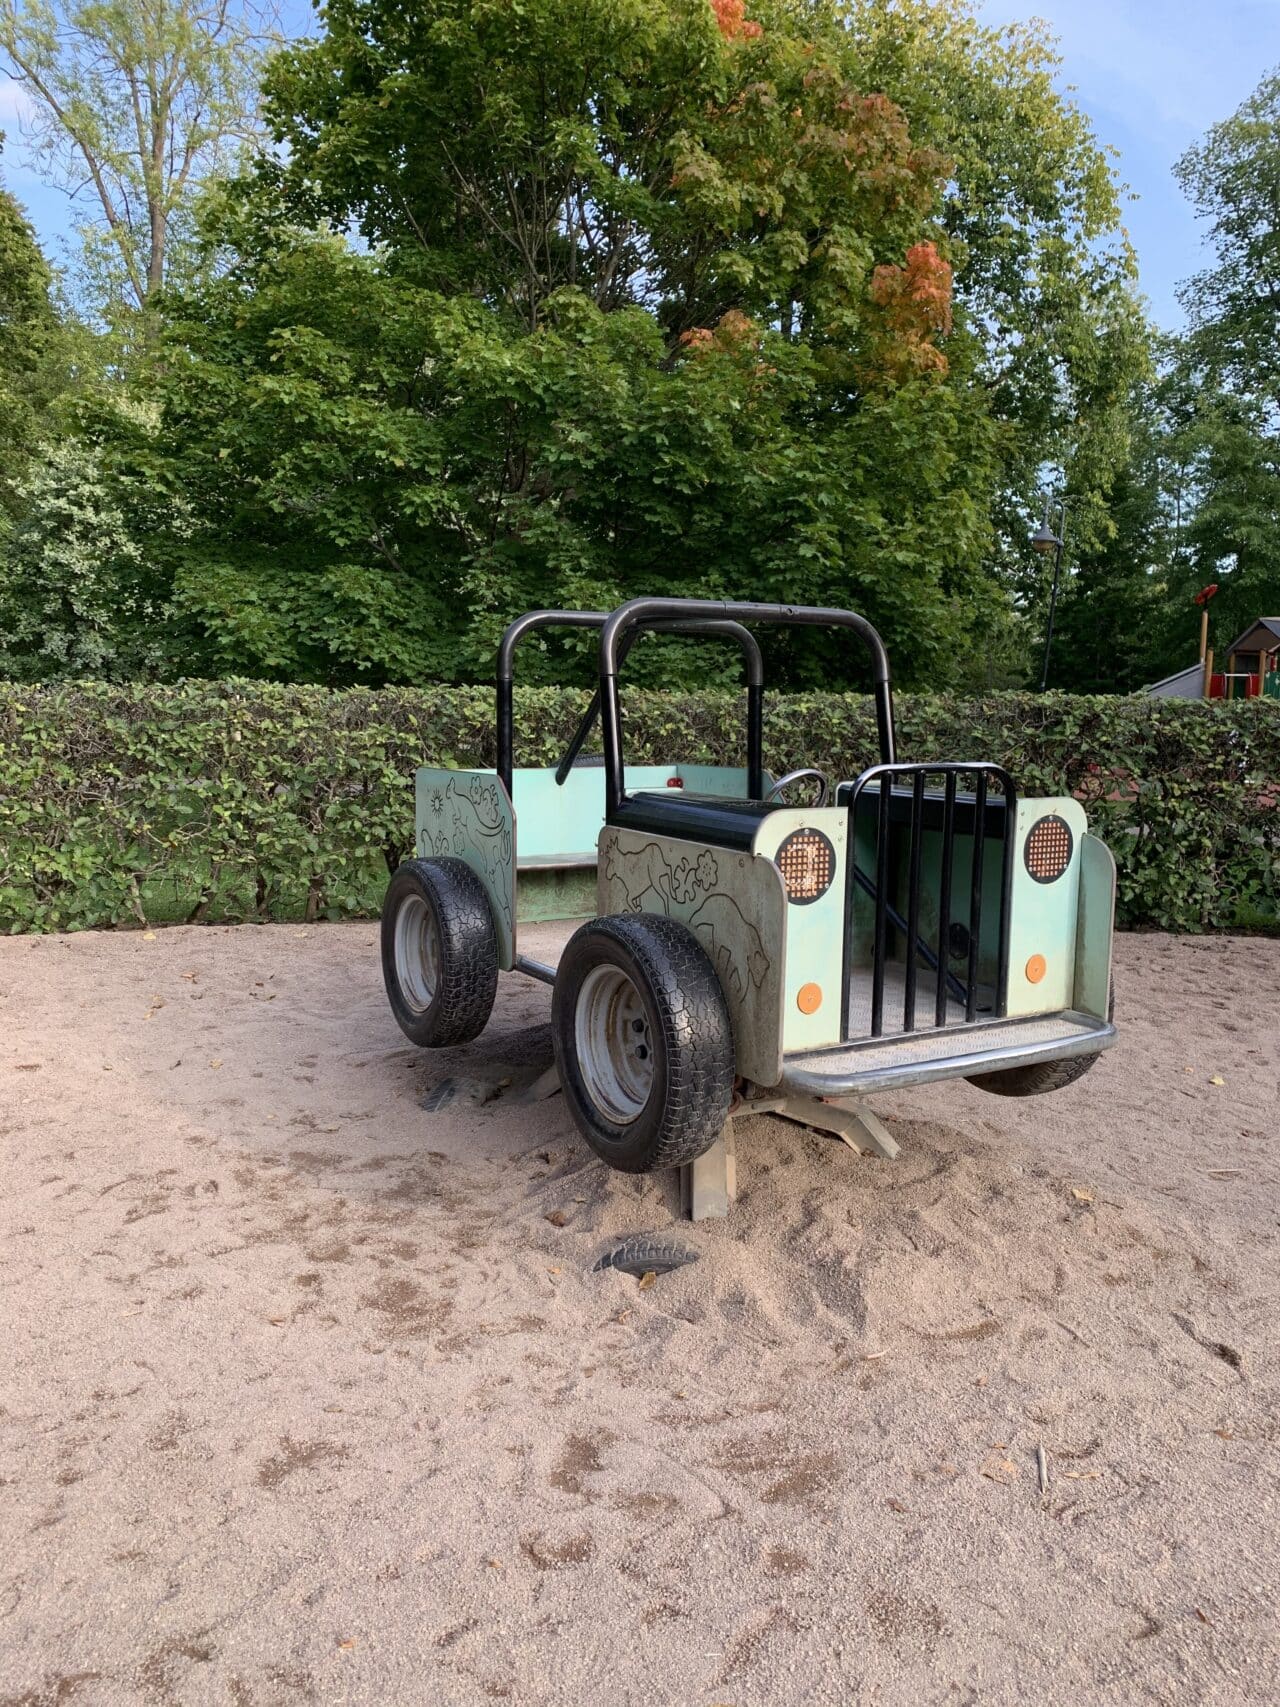 Safari Jeep For Children To Play In The Park